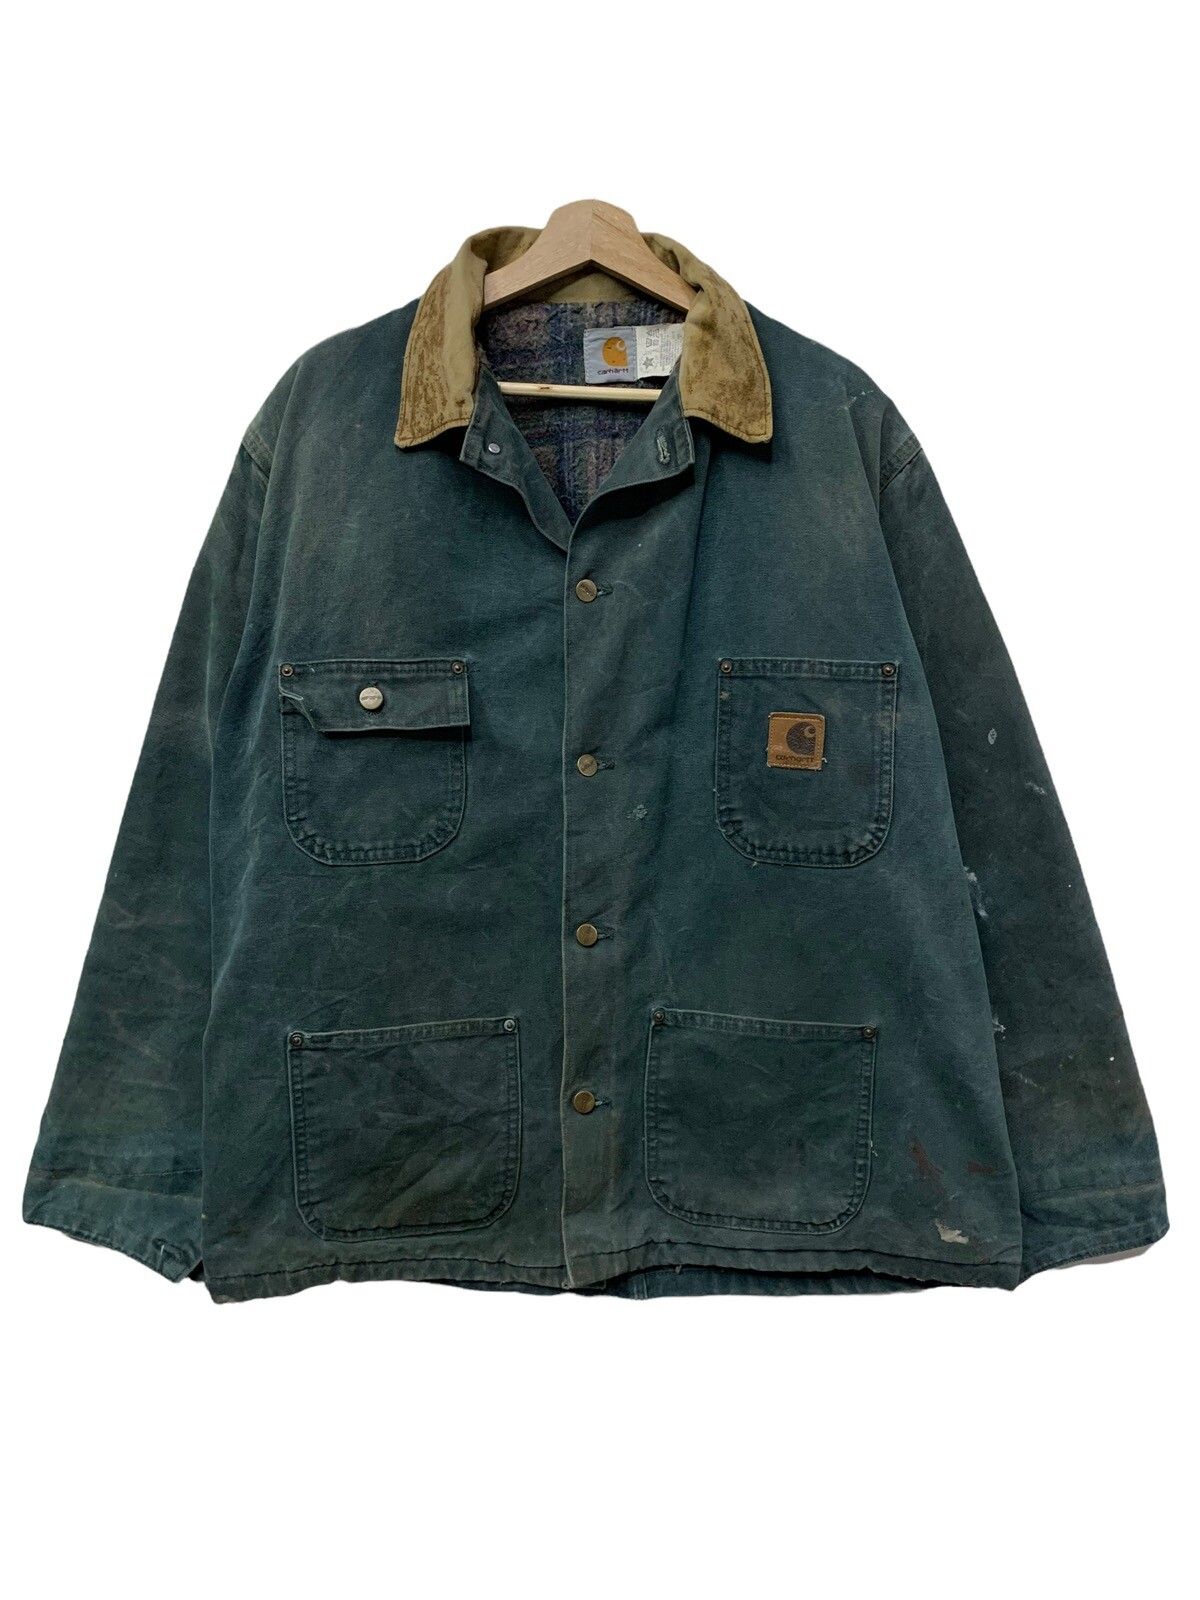 Pre-owned Carhartt X Carhartt Wip Distressed Carhartt Workers Chore Jackets In Turtle Dove Green